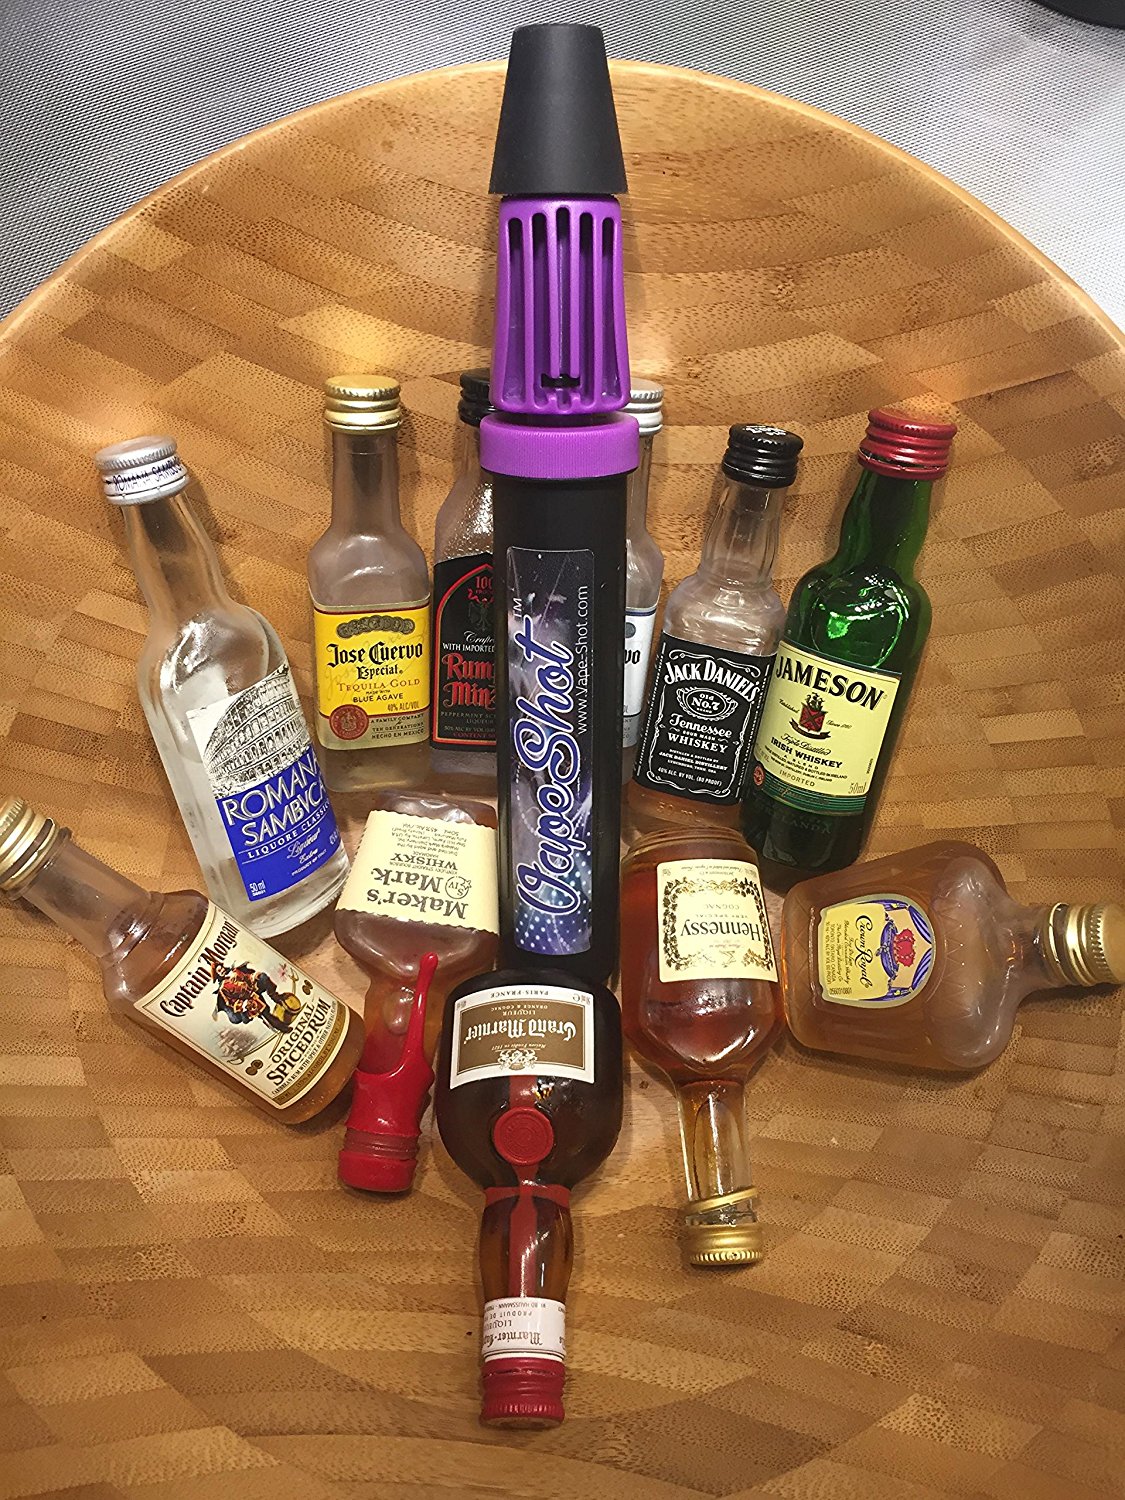 Alcohol vaporizing pump will be getting you friends drunker at a party near you. Get lit <a href=https://amzn.to/2L992qq target="_blank "no follow">here</a>.